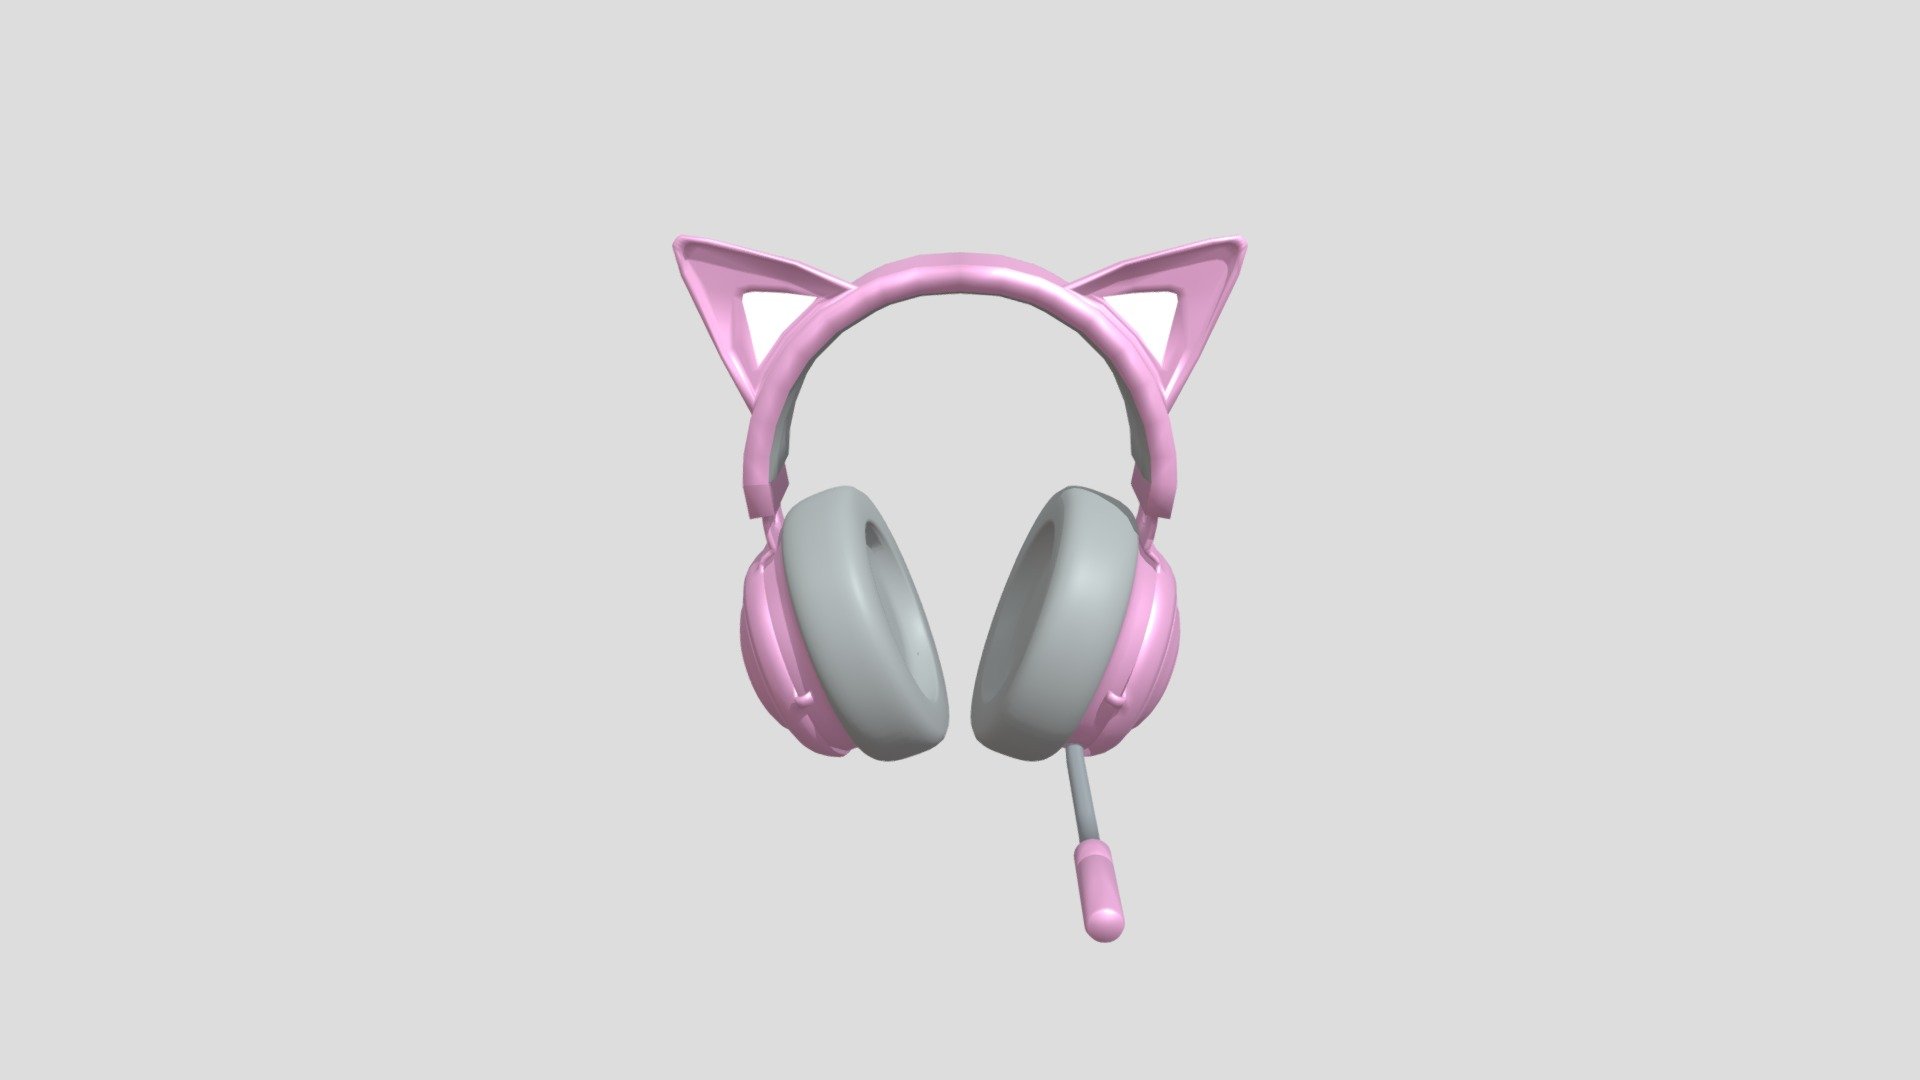 Based on the headset I own, Razer Kraken Kitty wired edition, but without the wire ^u^
The front view is more accurate and I did not model in the volume/buttons on the back. 
Maybe I will revisit this one day 3d model